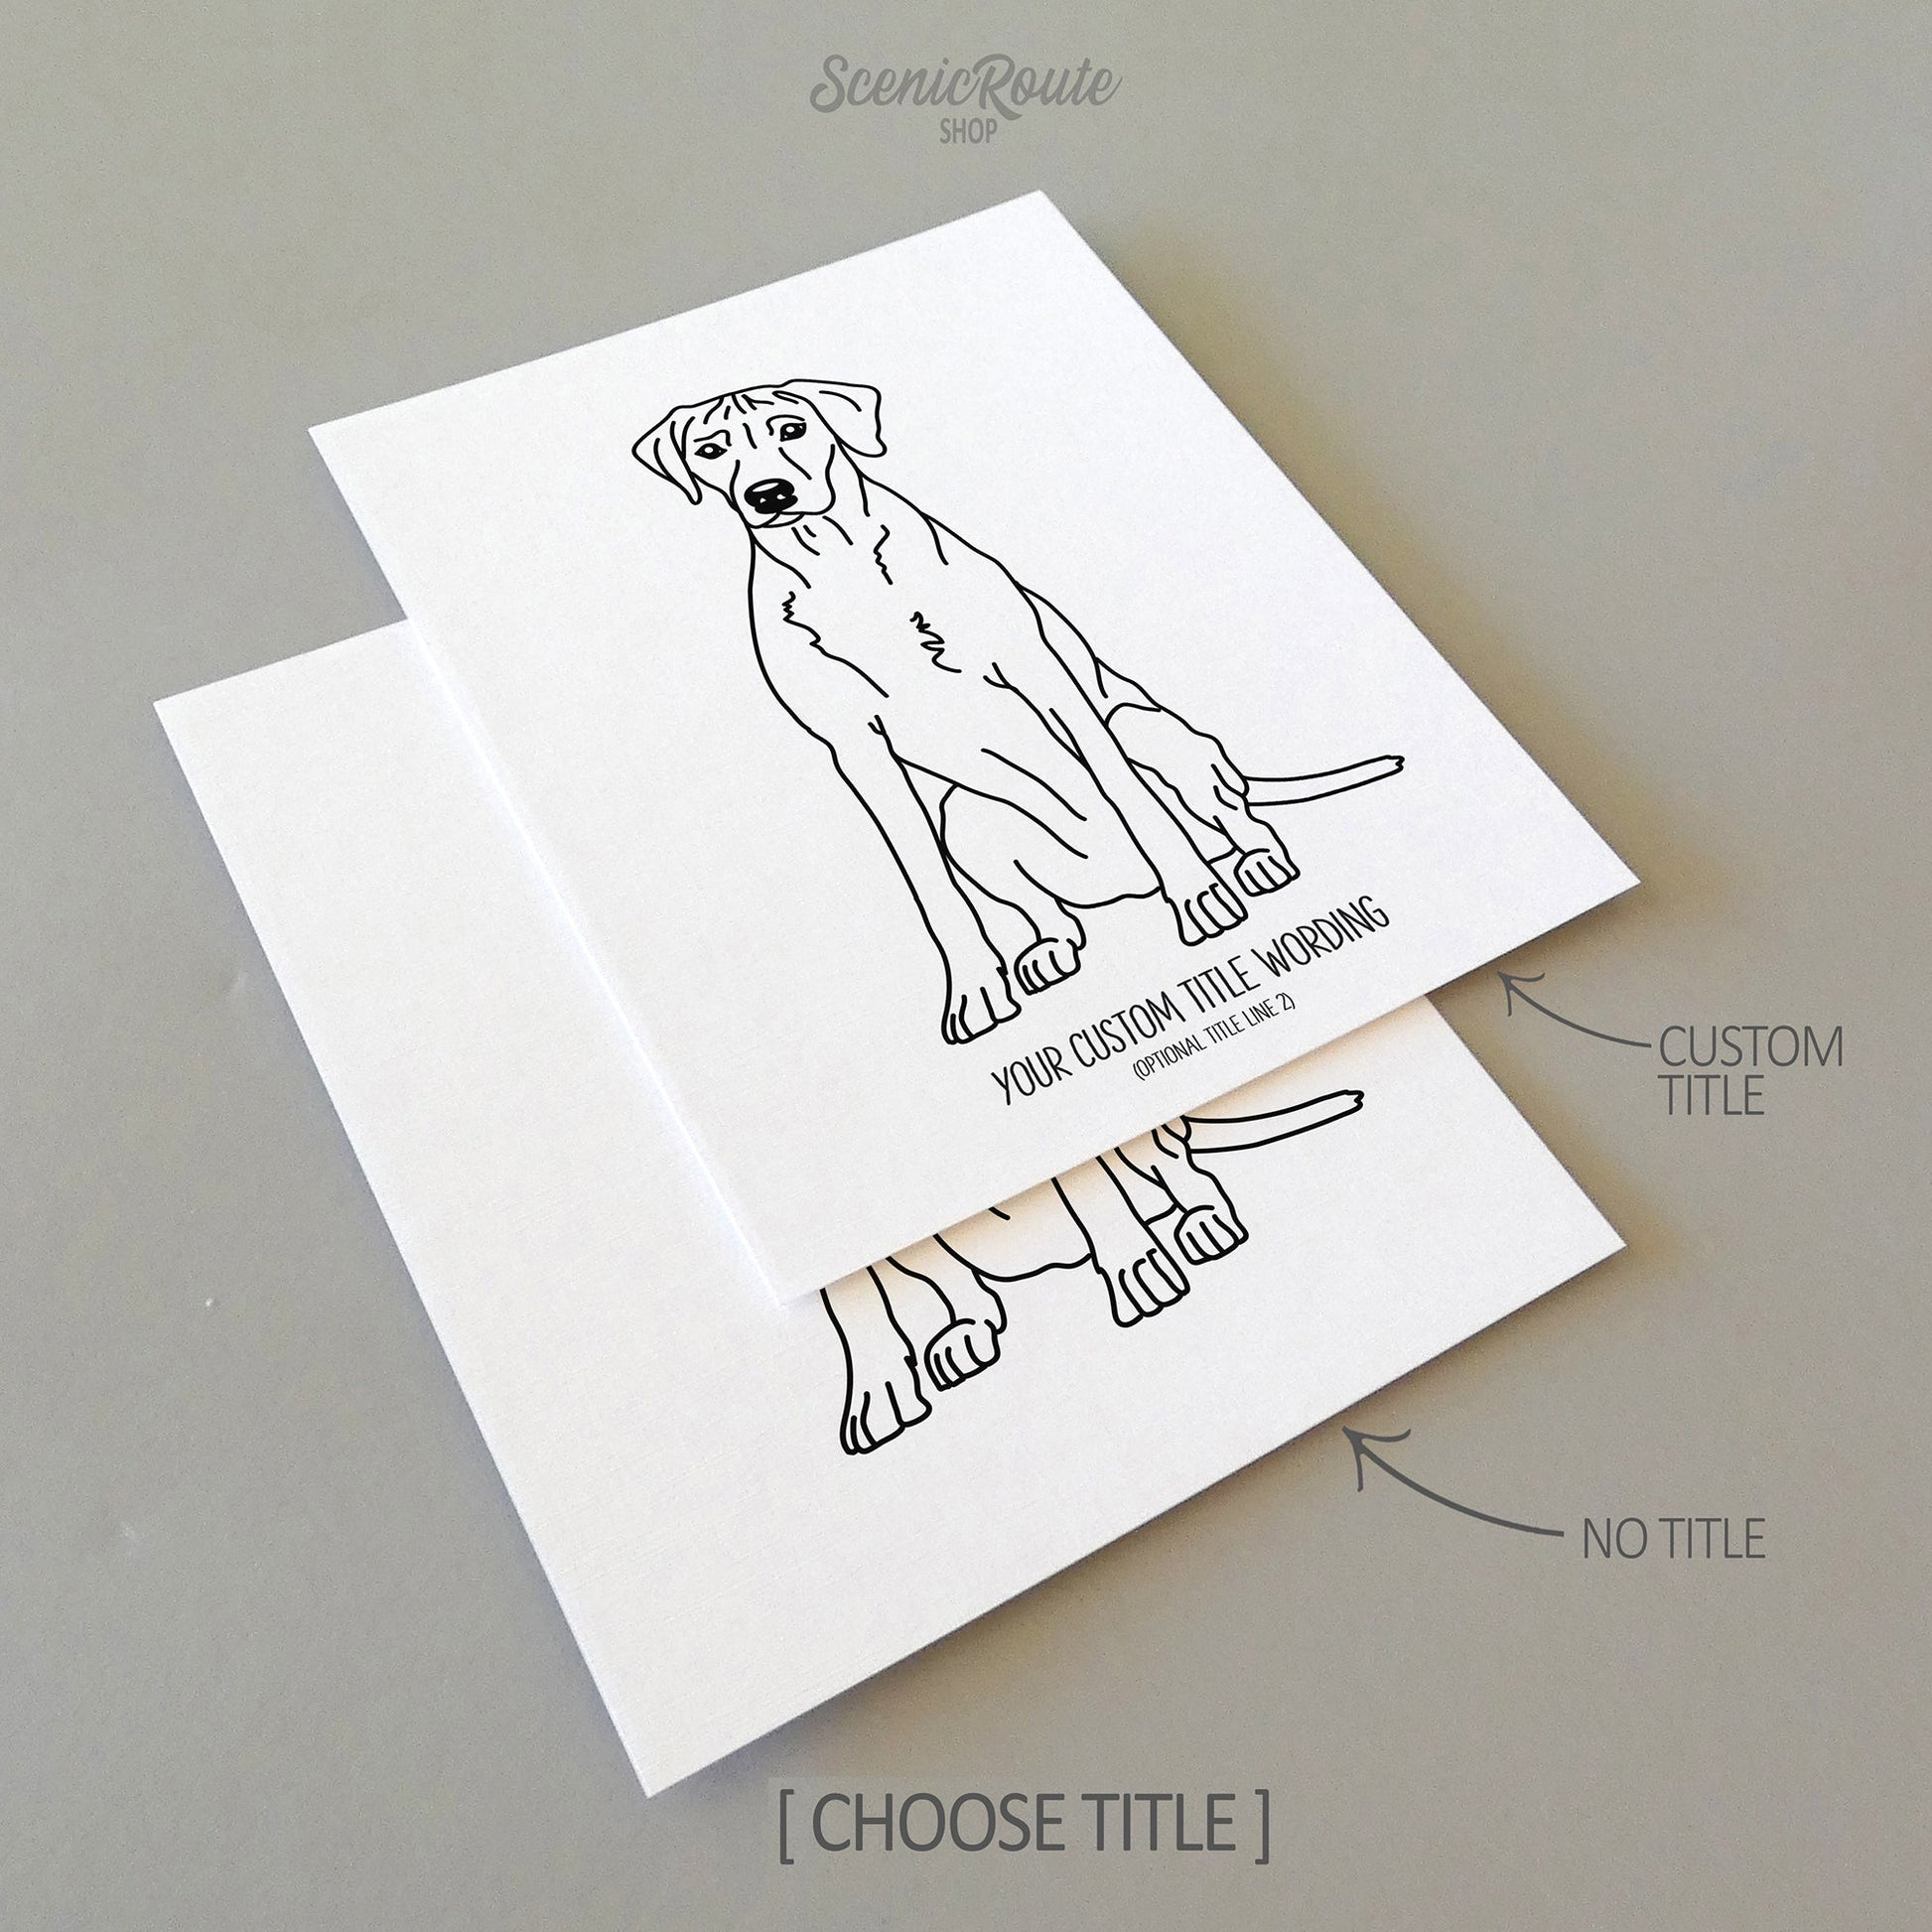 Two line art drawings of a Rhodesian Ridgeback dog on white linen paper with a gray background.  The pieces are shown with “No Title” and “Custom Title” options for the available art print options.